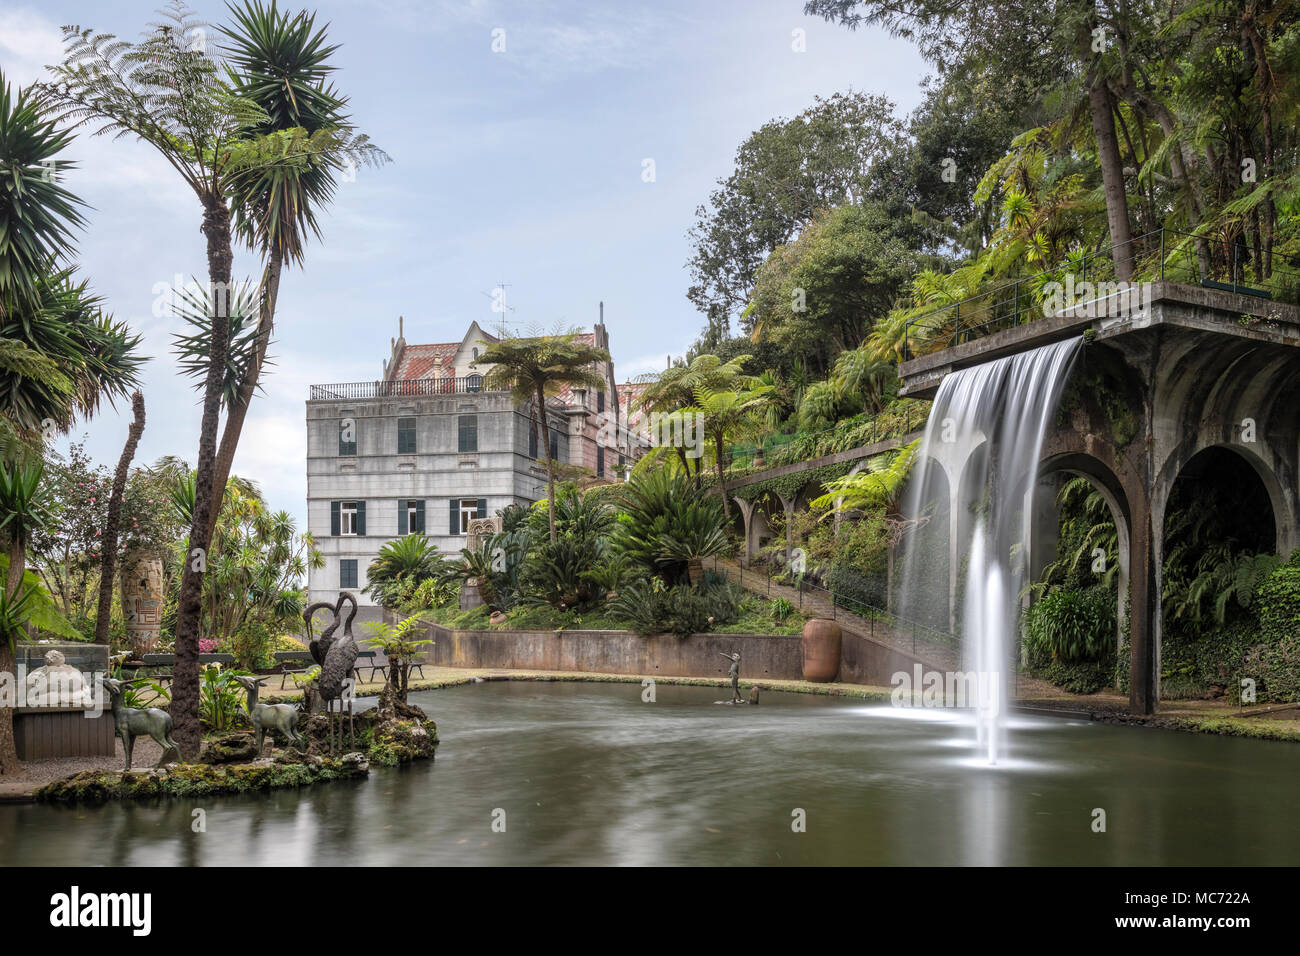 Jardin Tropical de Monte Palace, Funchal, Madeira, Portugal, Europe Banque D'Images